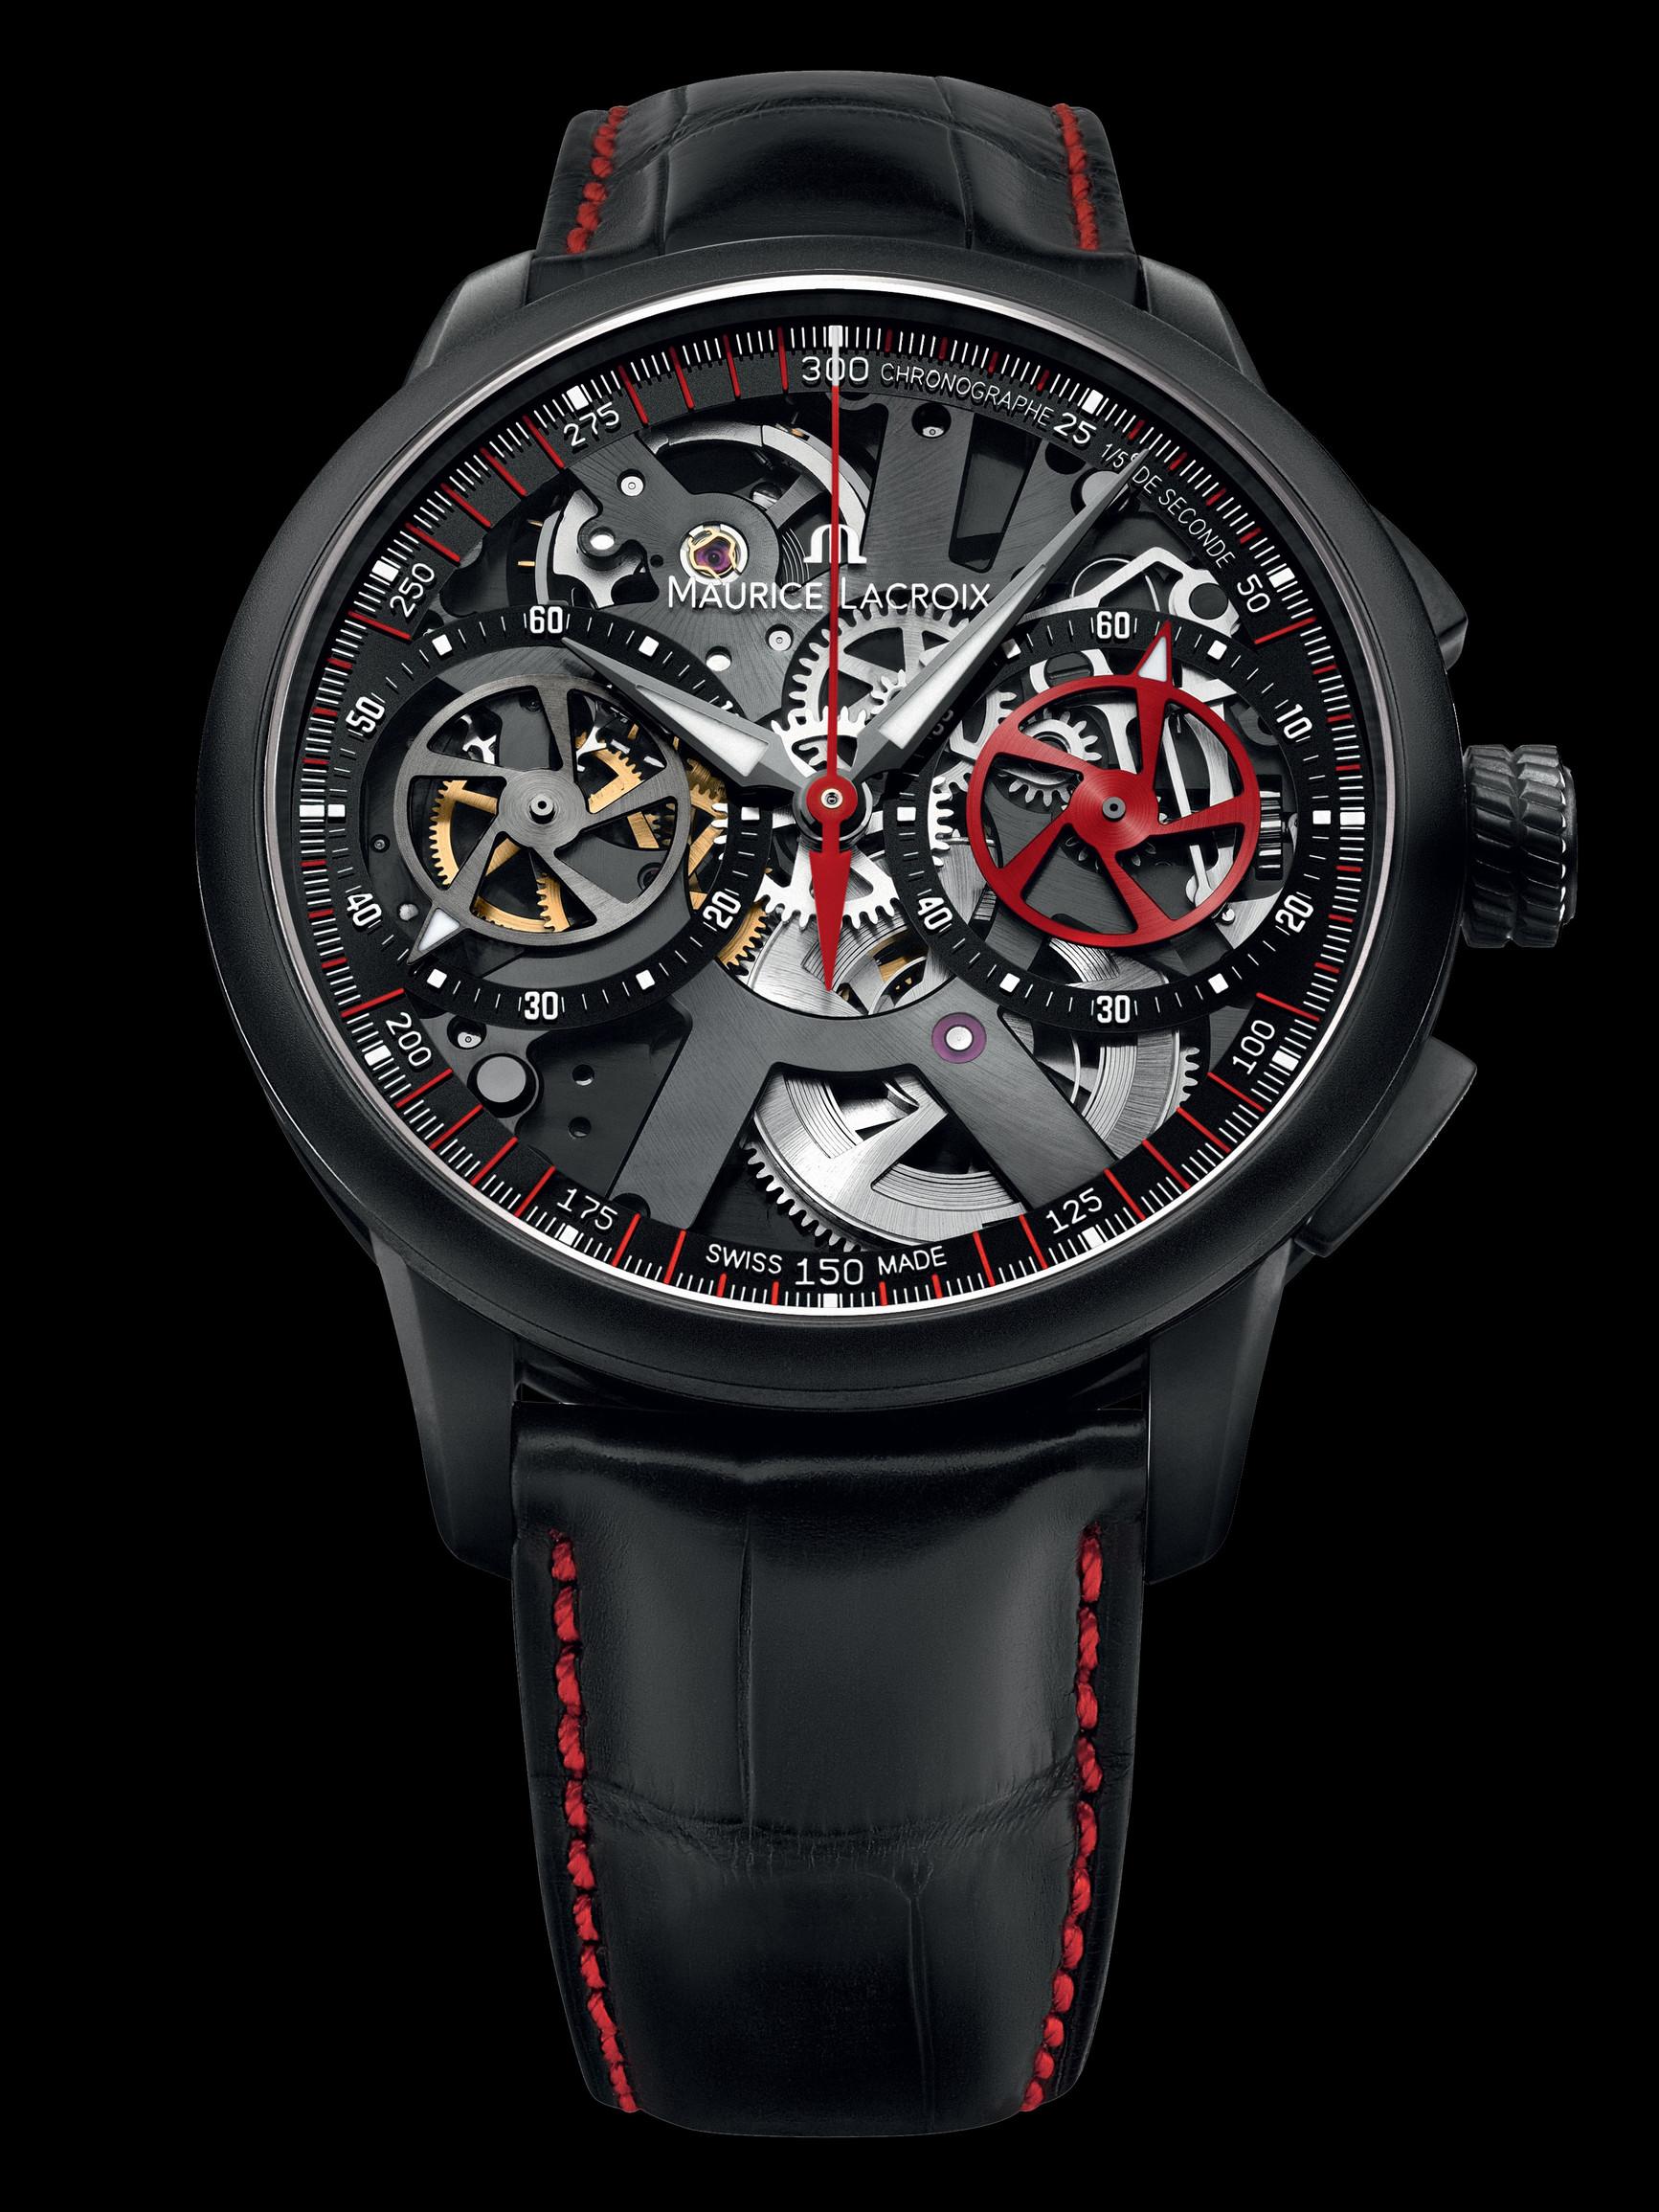 The new Masterpiece Le Chronographe Squelette Limited Edition 